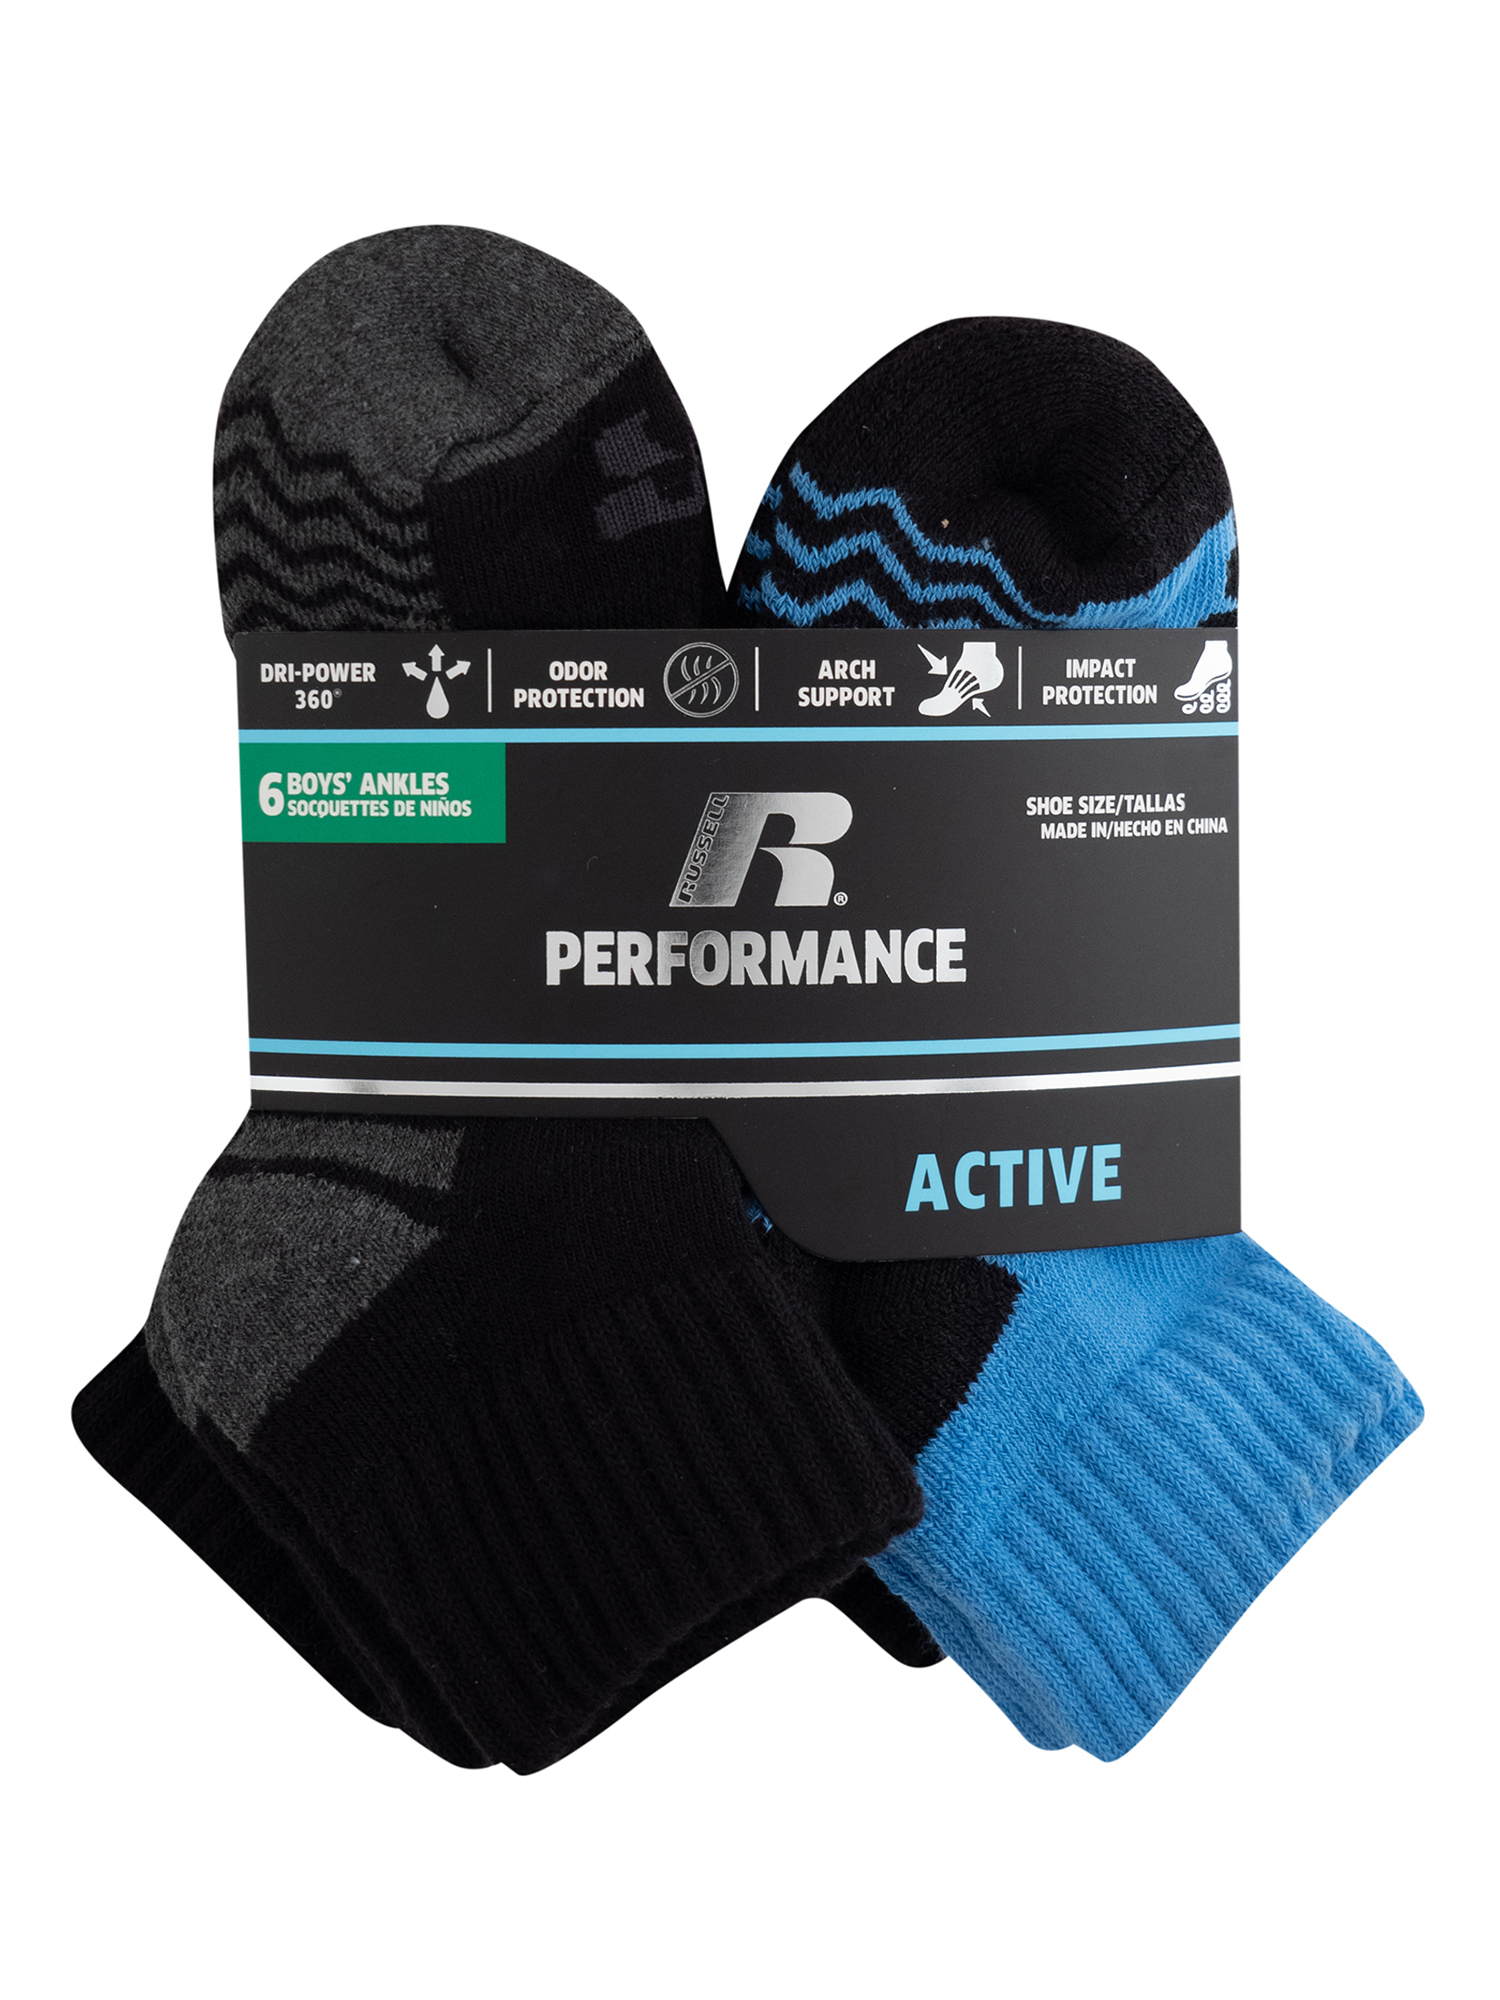 Russell Active Boys Ankle Socks 6 Pack Socks - image 3 of 4